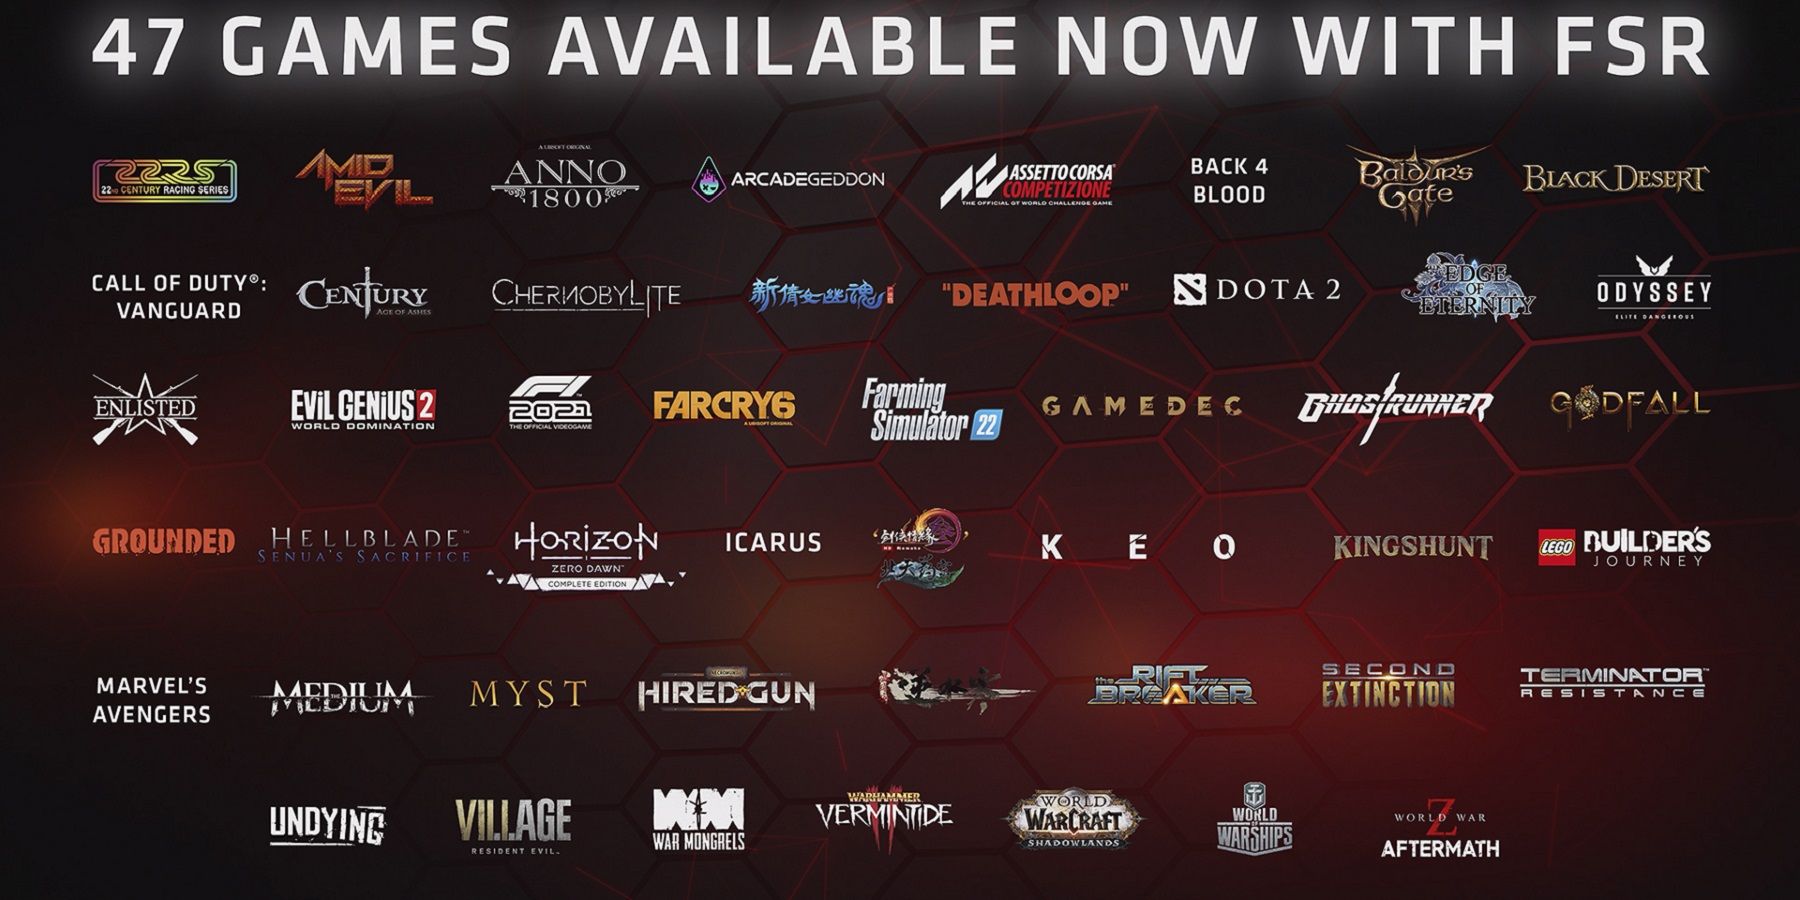 An image showing all the games that AMD's upscaling supports, including Deathloop and Resident Evil Village.